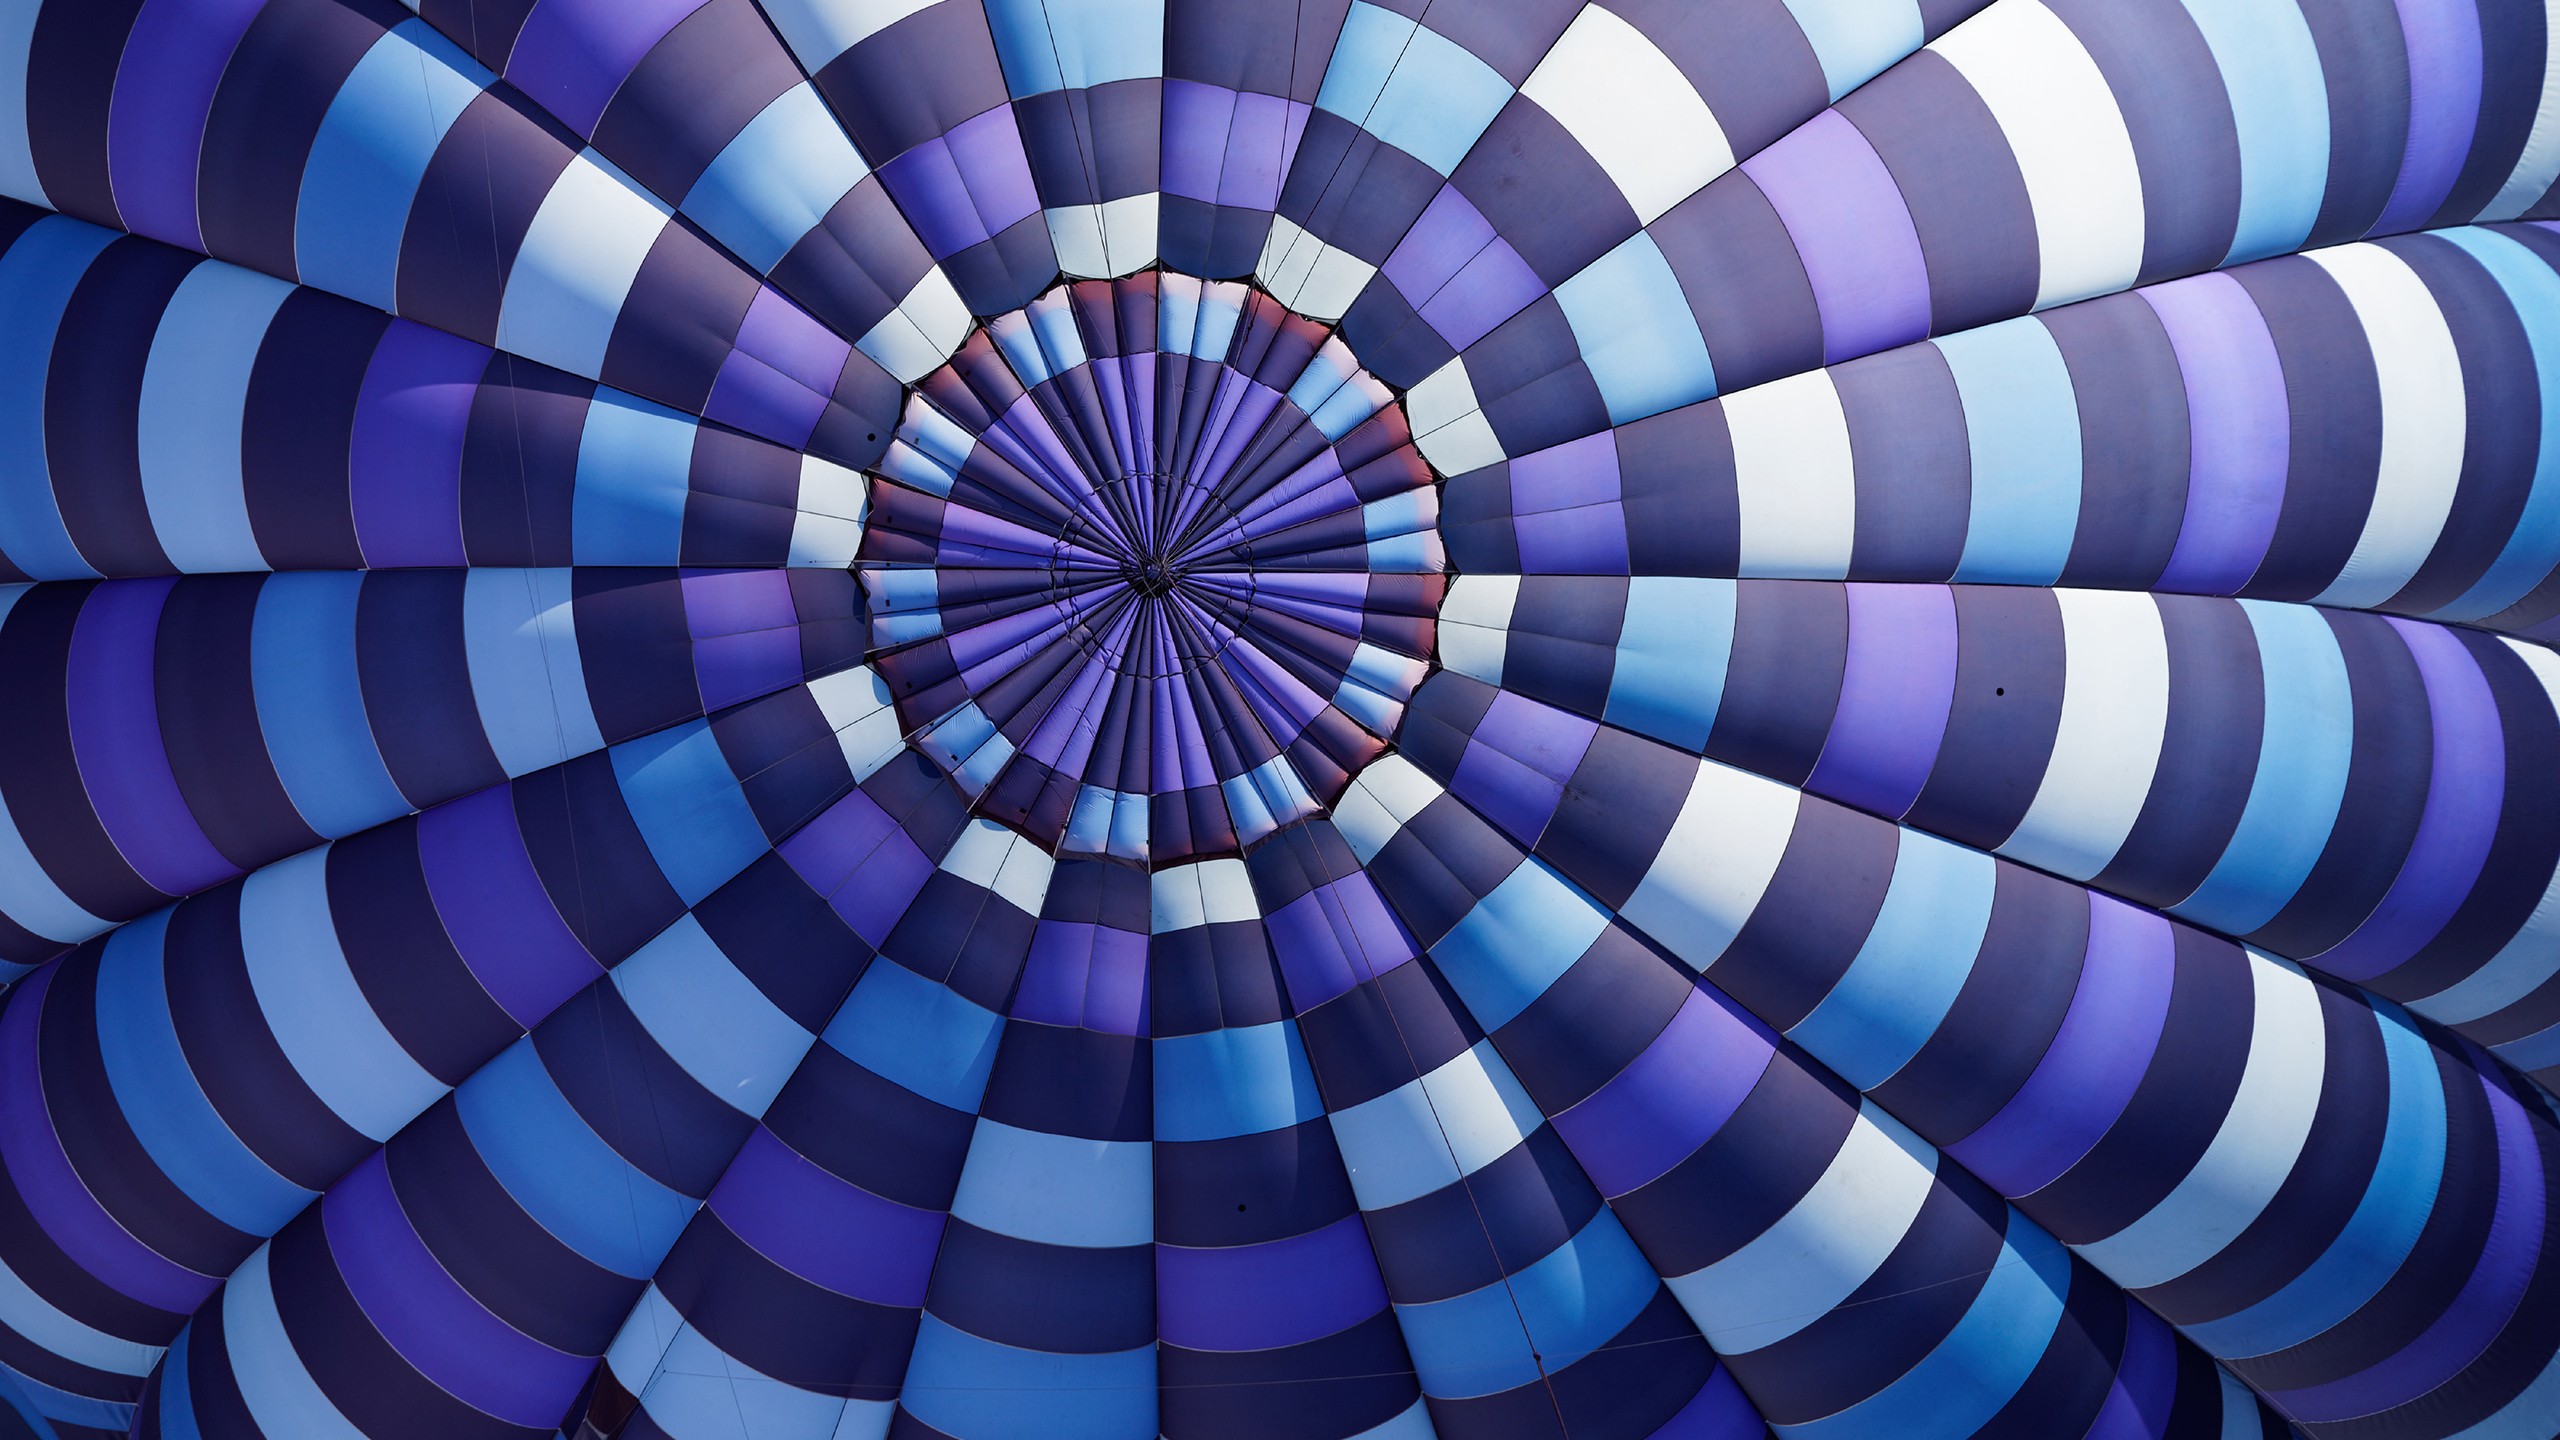 General 2560x1440 hot air balloons abstract blue texture purple